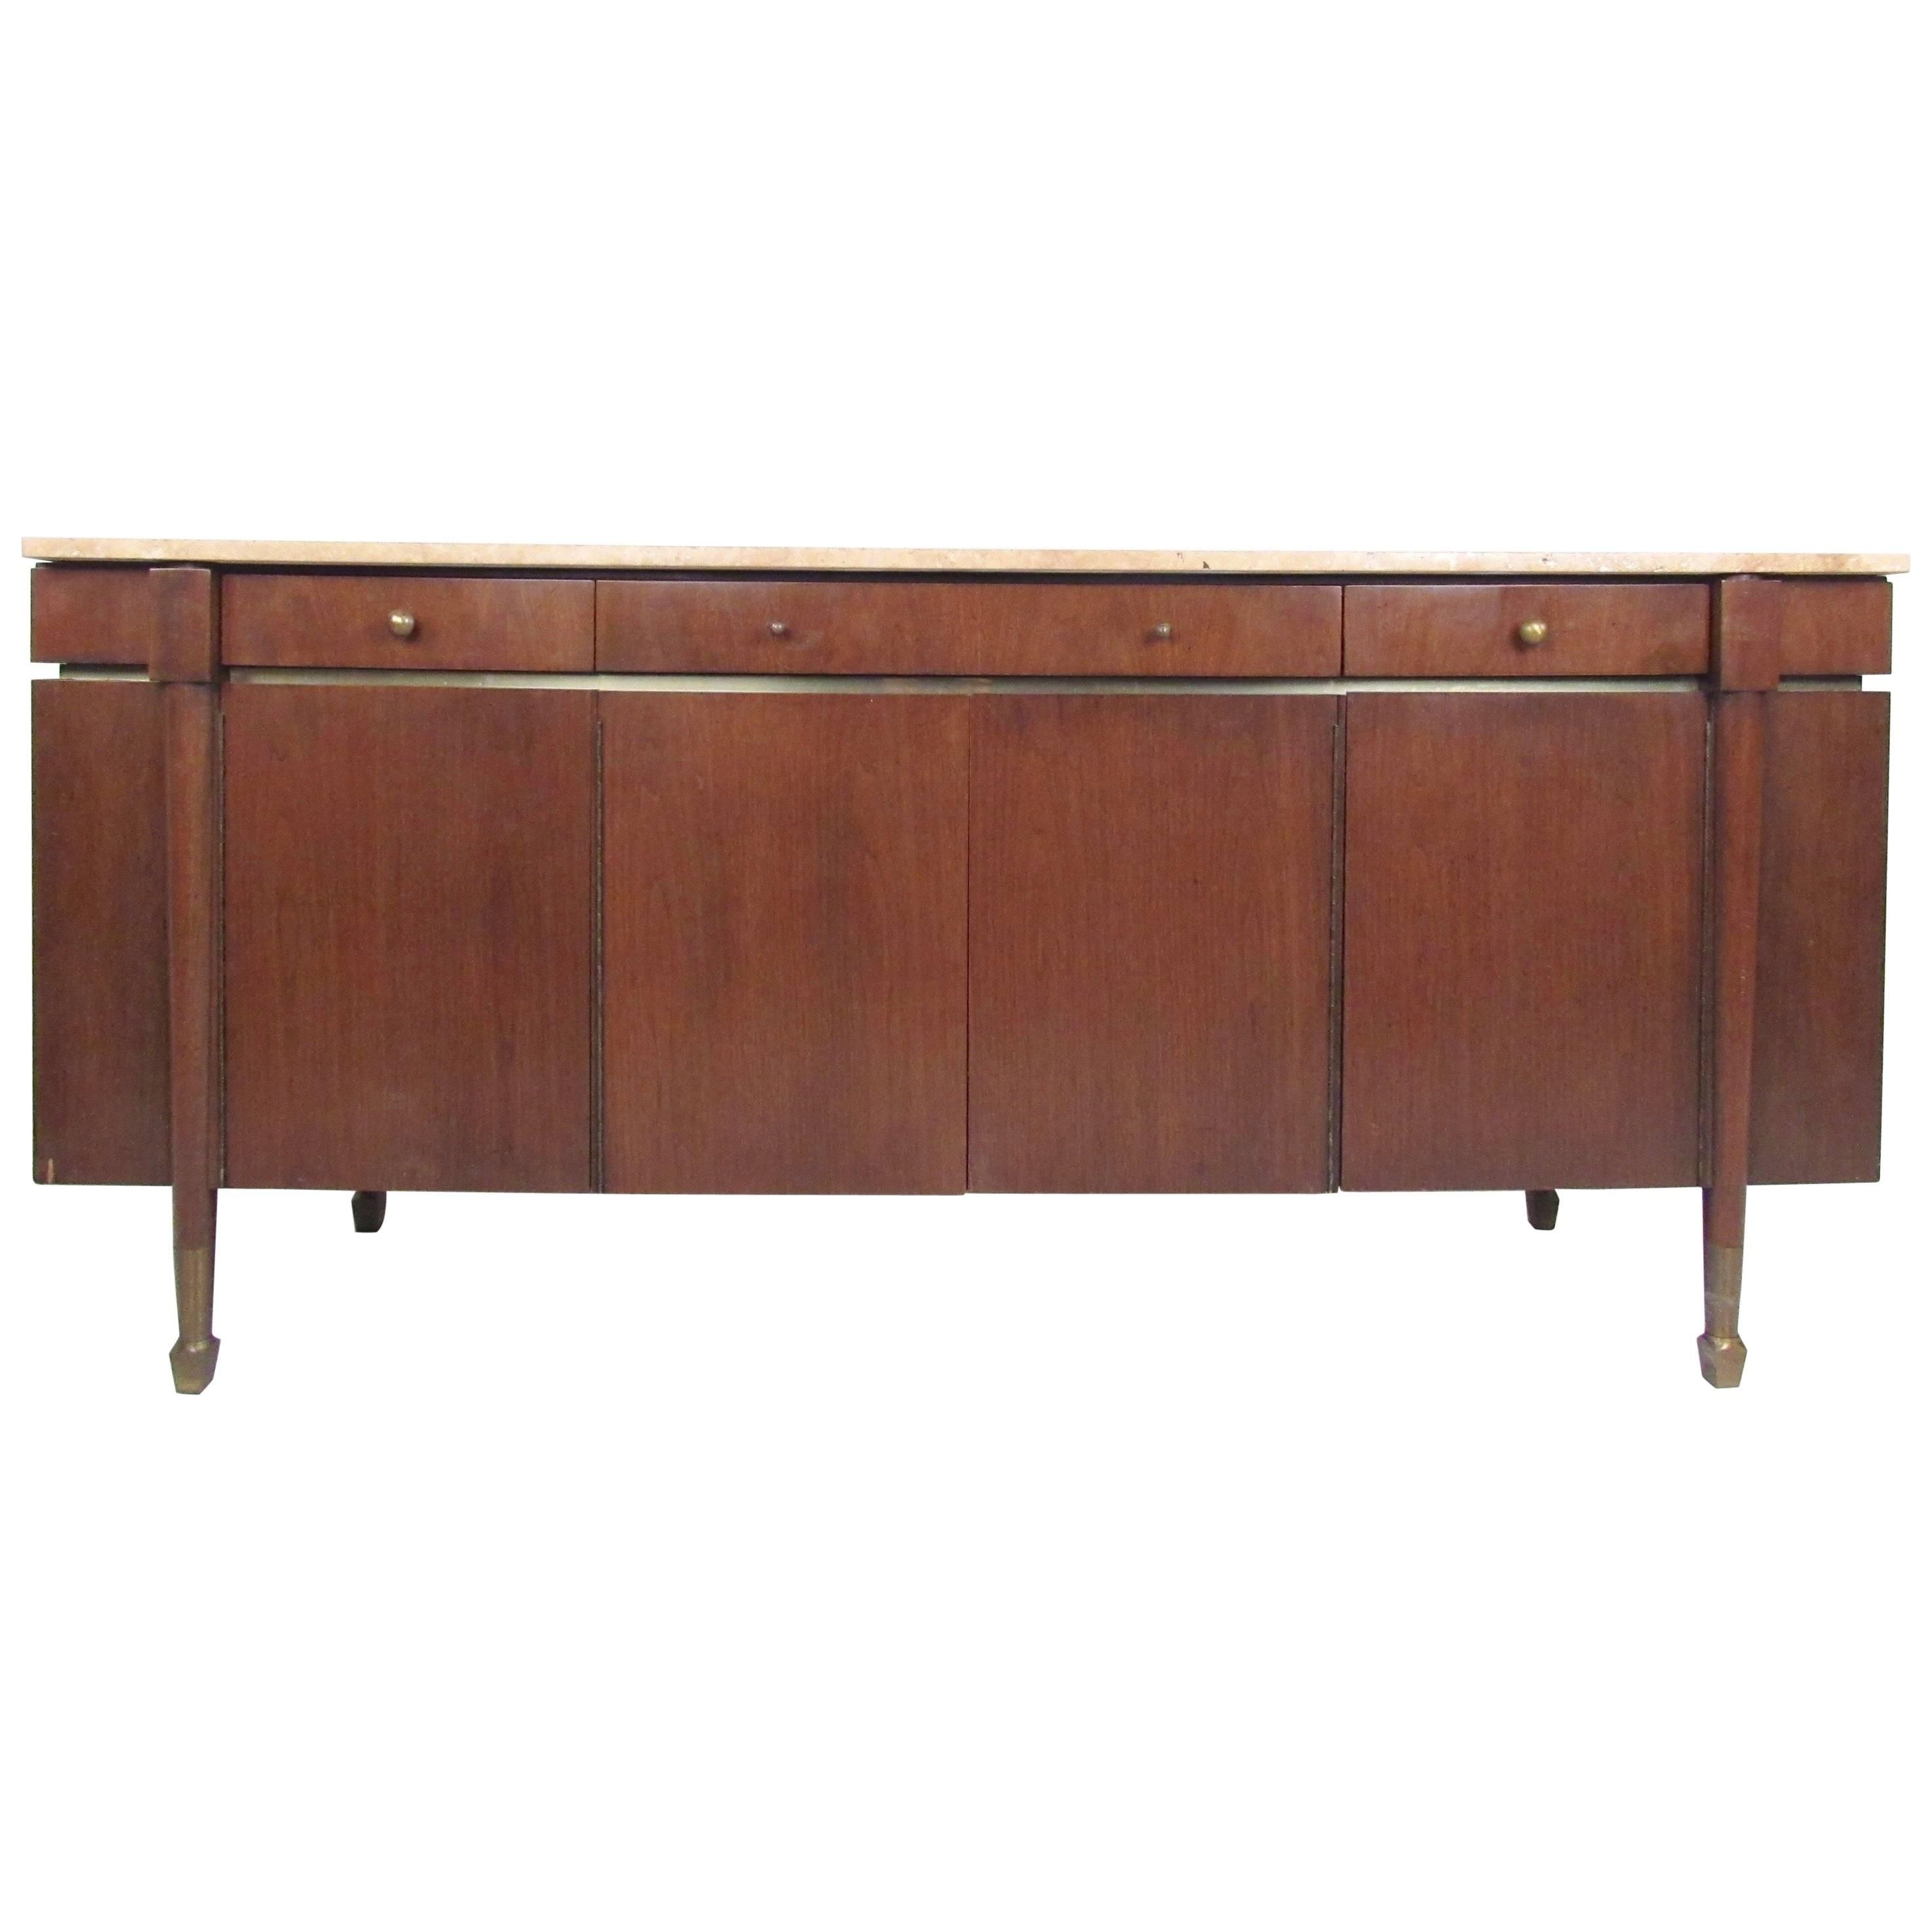 Striking 'intarsia' Sideboard With A Vintage Designaldo Rossi Pertaining To Rossi Large Sideboards (View 2 of 30)